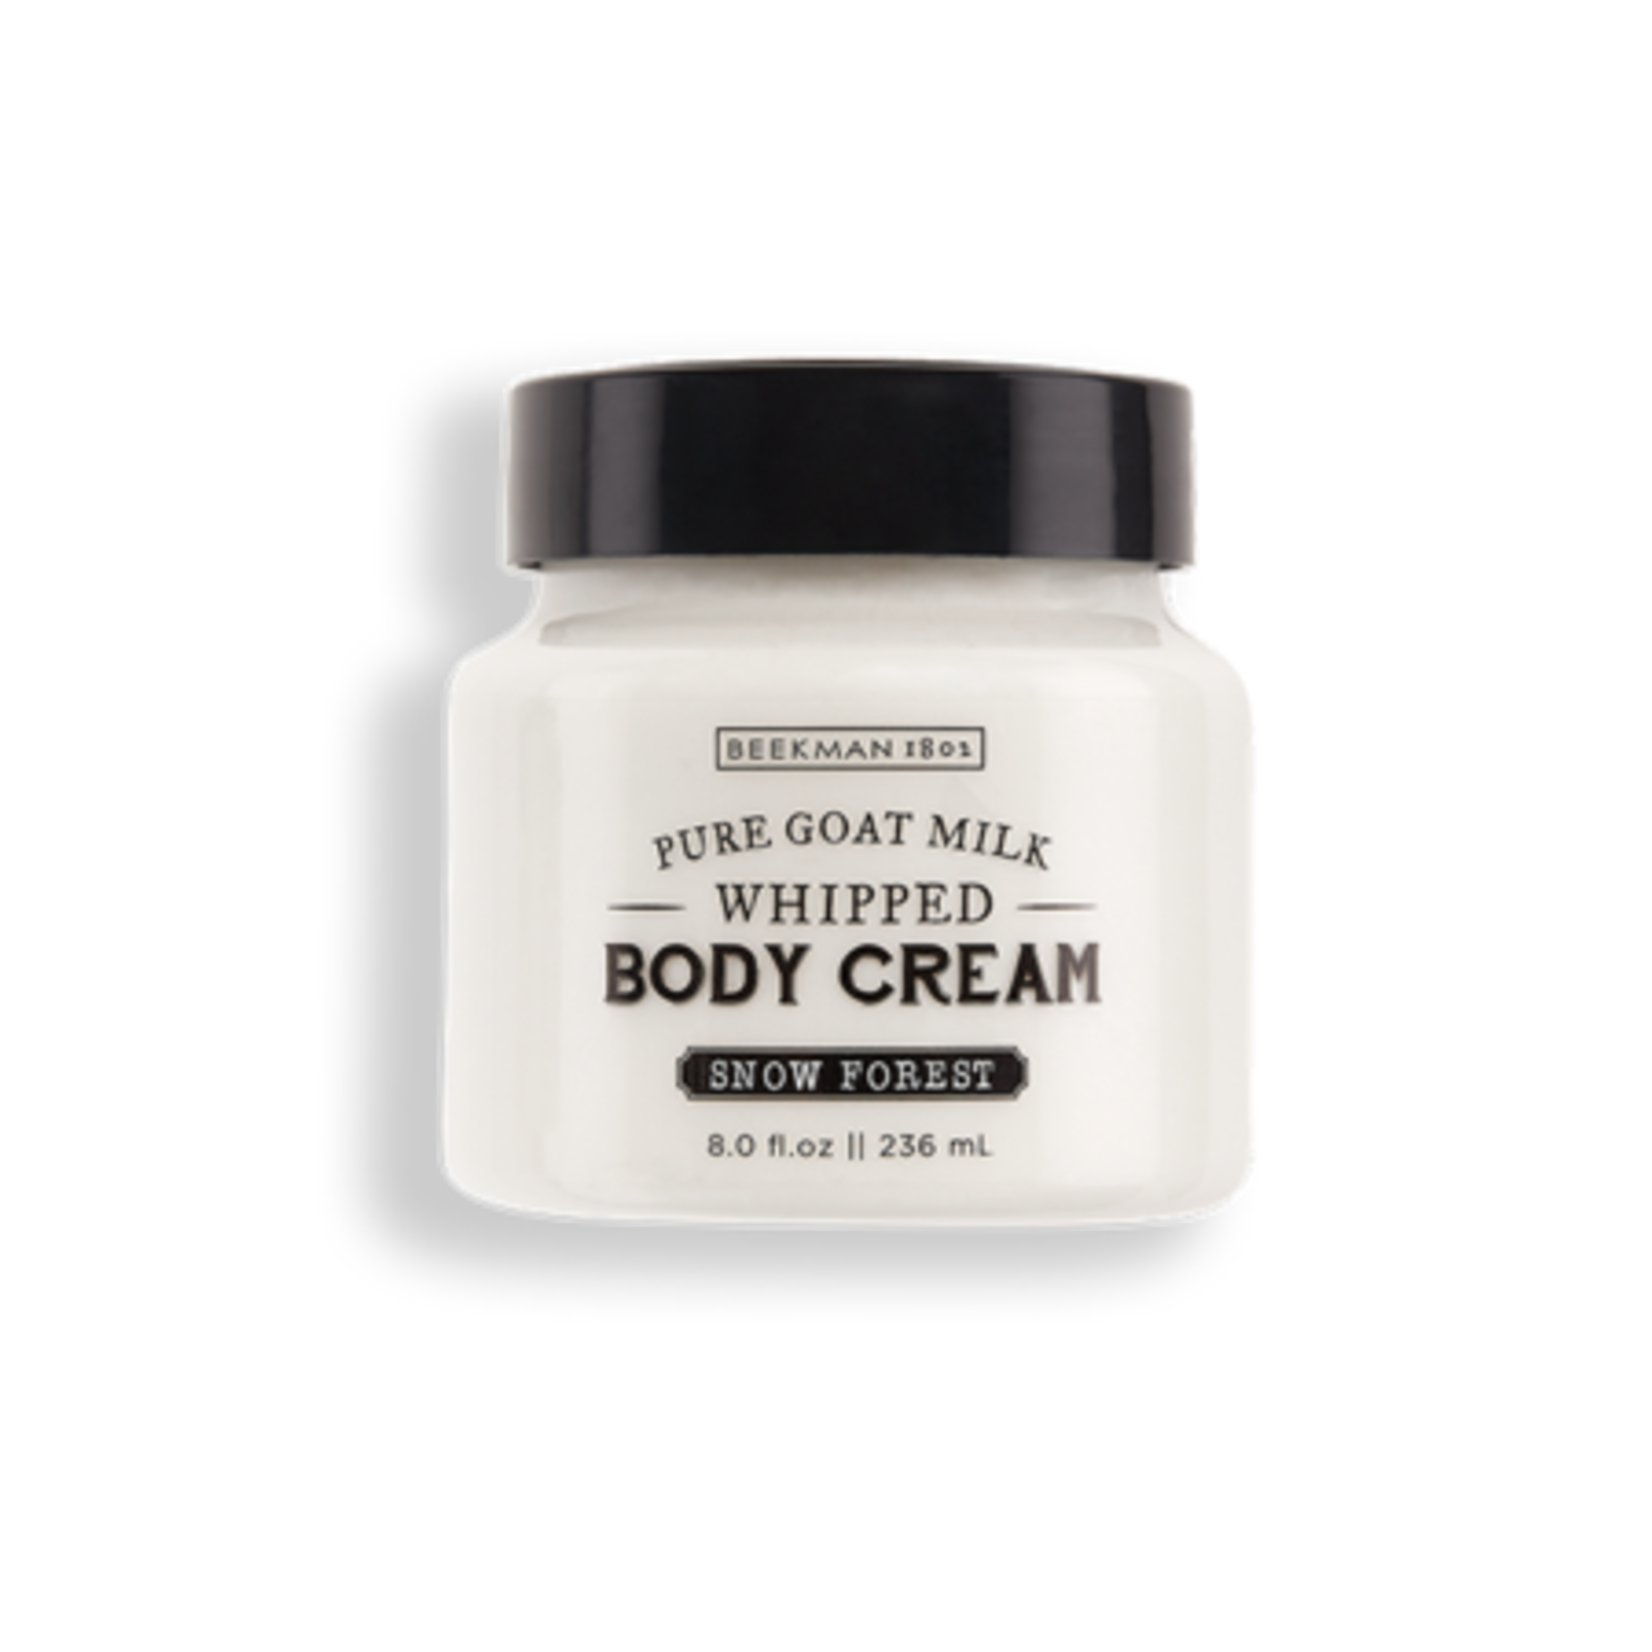 BEEKMAN 1802 Snow Forest Whipped Body Cream